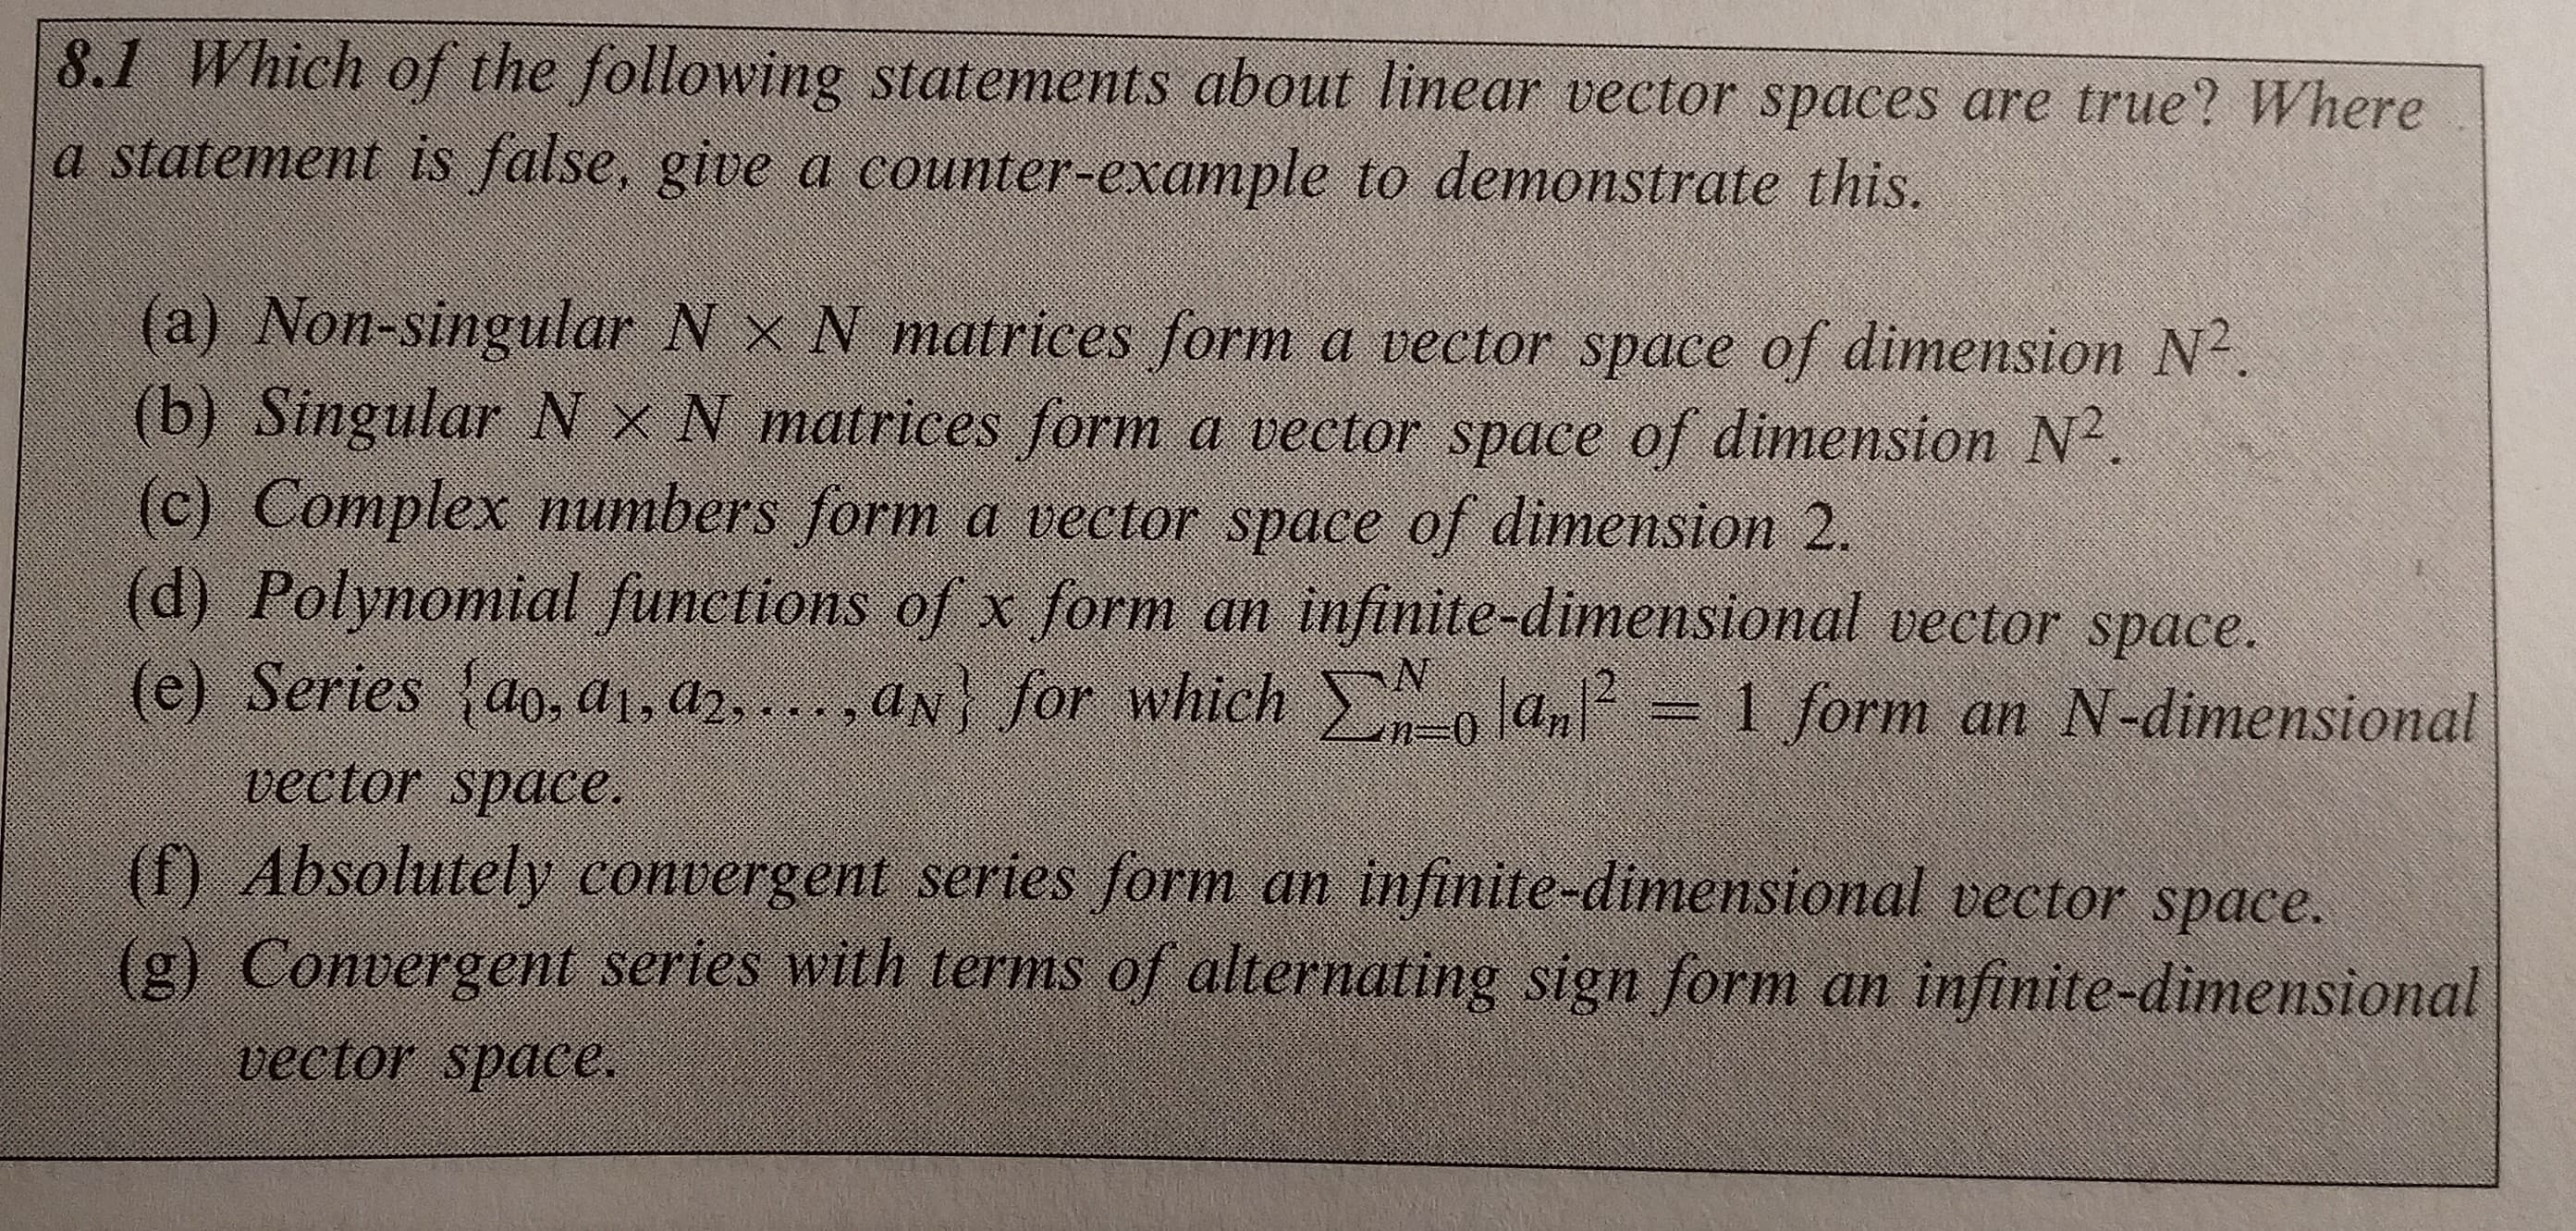 8.1 Which of the following statements about linear vector spaces are true? Where
a statement is false, give a counter-example to demonstrate this.
(a) Non-singular N x N matrices form a vector space of dimension N2
(b) Singular N x N matrices form a vector space of dimension N2
(c) Complex numbers form a vector space of dimension 2.
(d) Polynomial functions of x form an infinite-dimensional vector space.
(e): Series-d07a。( …ndly for which, N 0 Oly 2 1 forman N-dimensional
vector space
(f) Absolutely convergent series form an infinite-dimensional vector space.
(g) Convergent series with terms of alternating sign form an infinite-dimensional
vector space.
